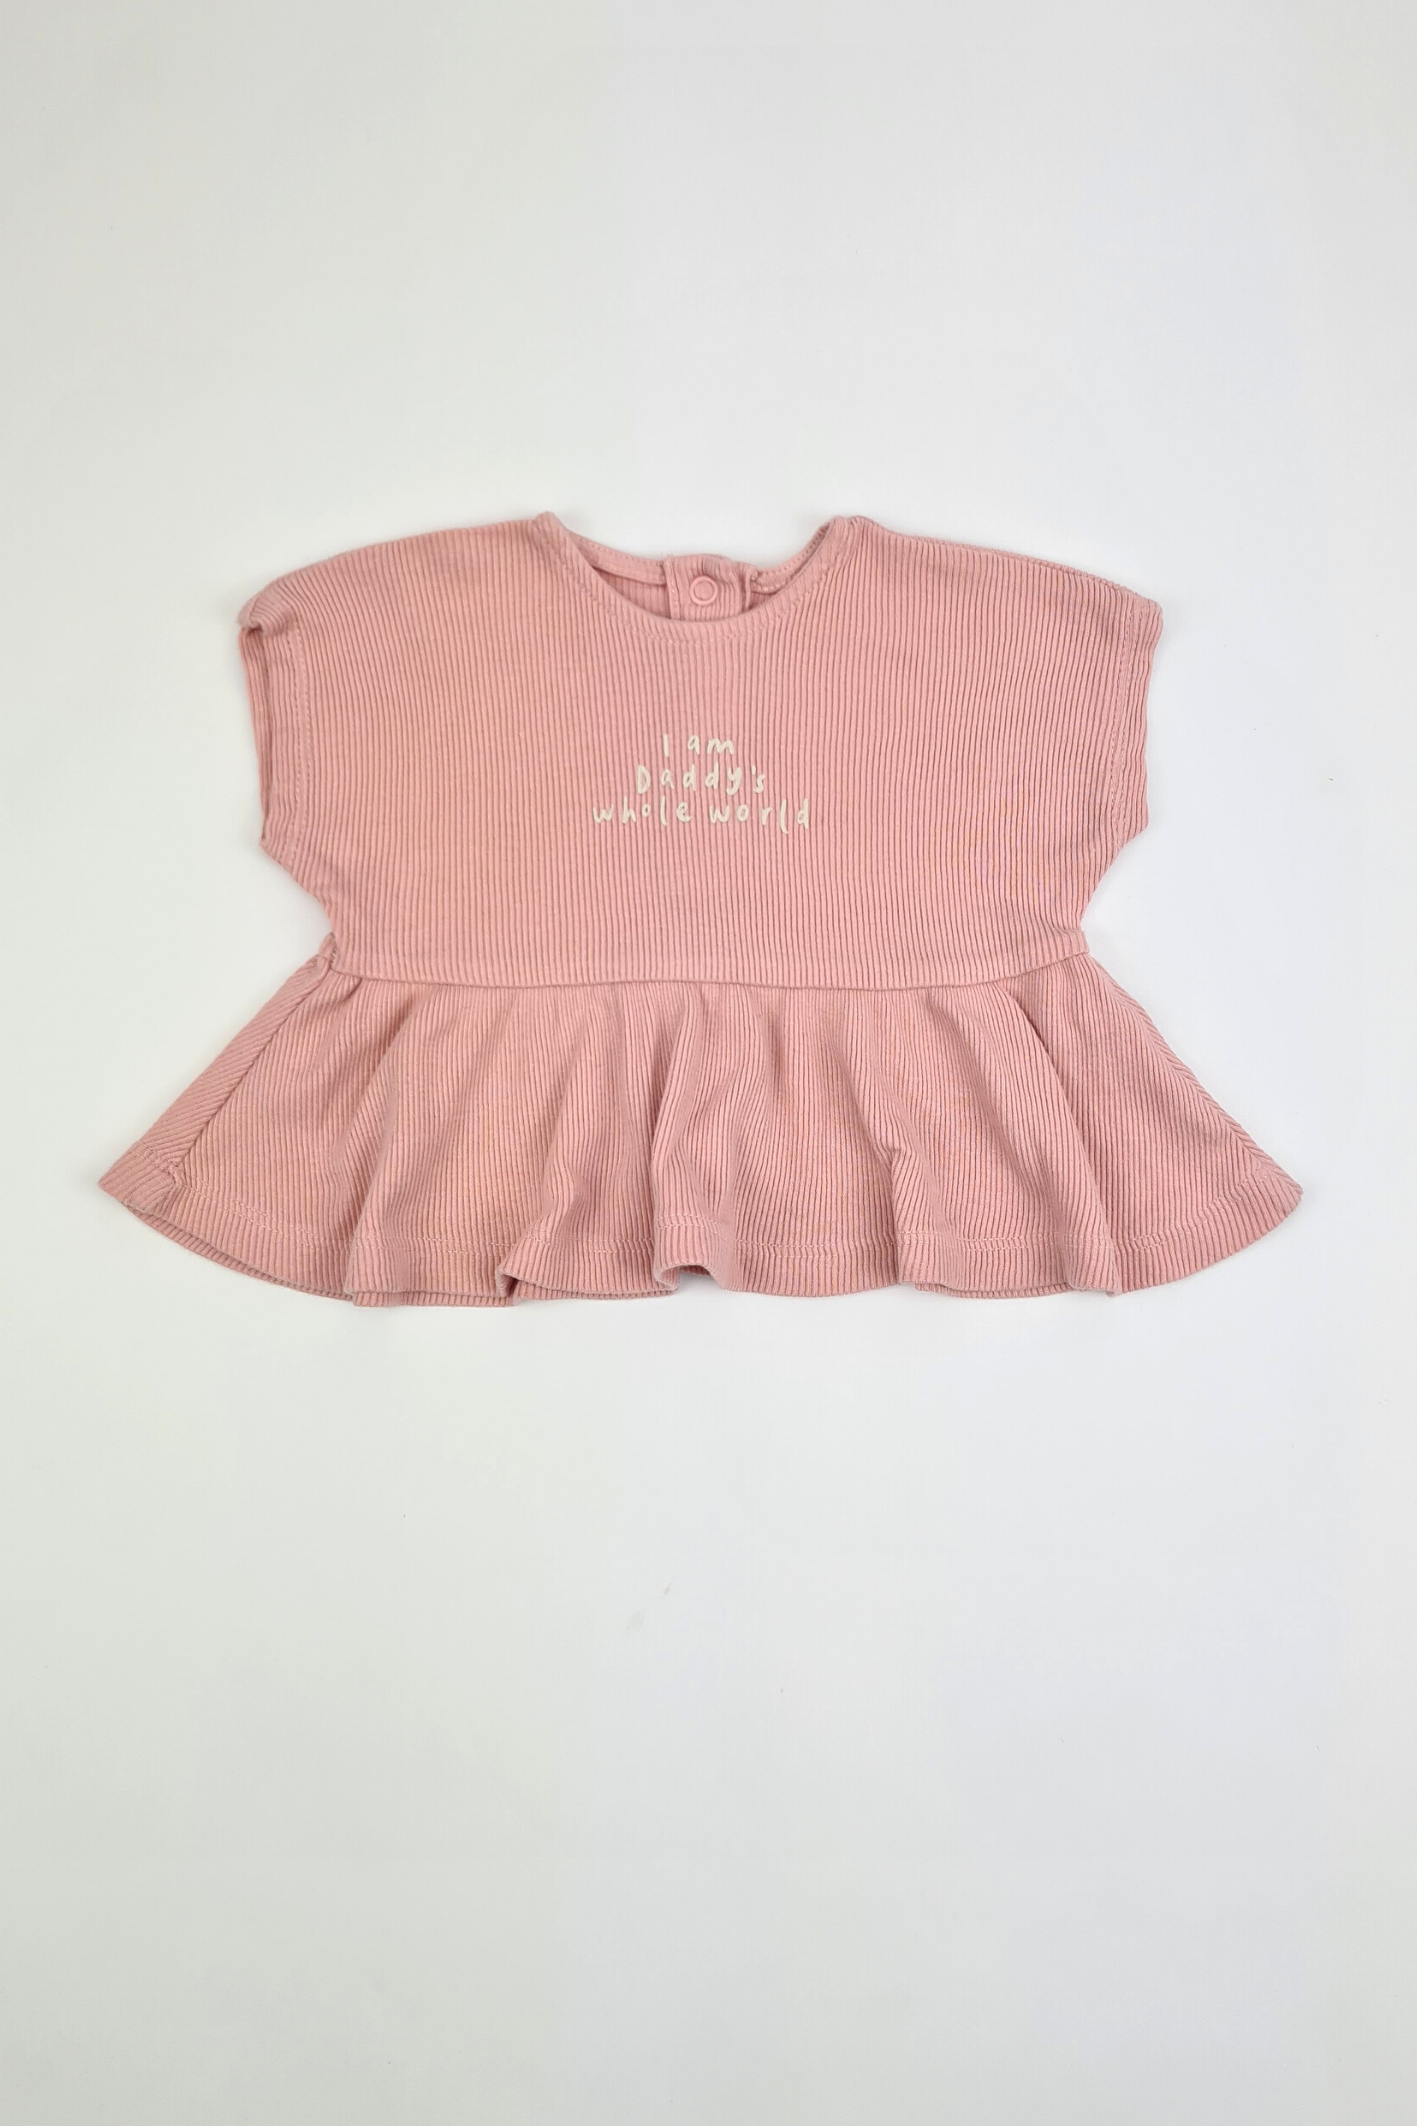 First Size 9lbs 'I am Daddys Whole World' Pink Top (George)